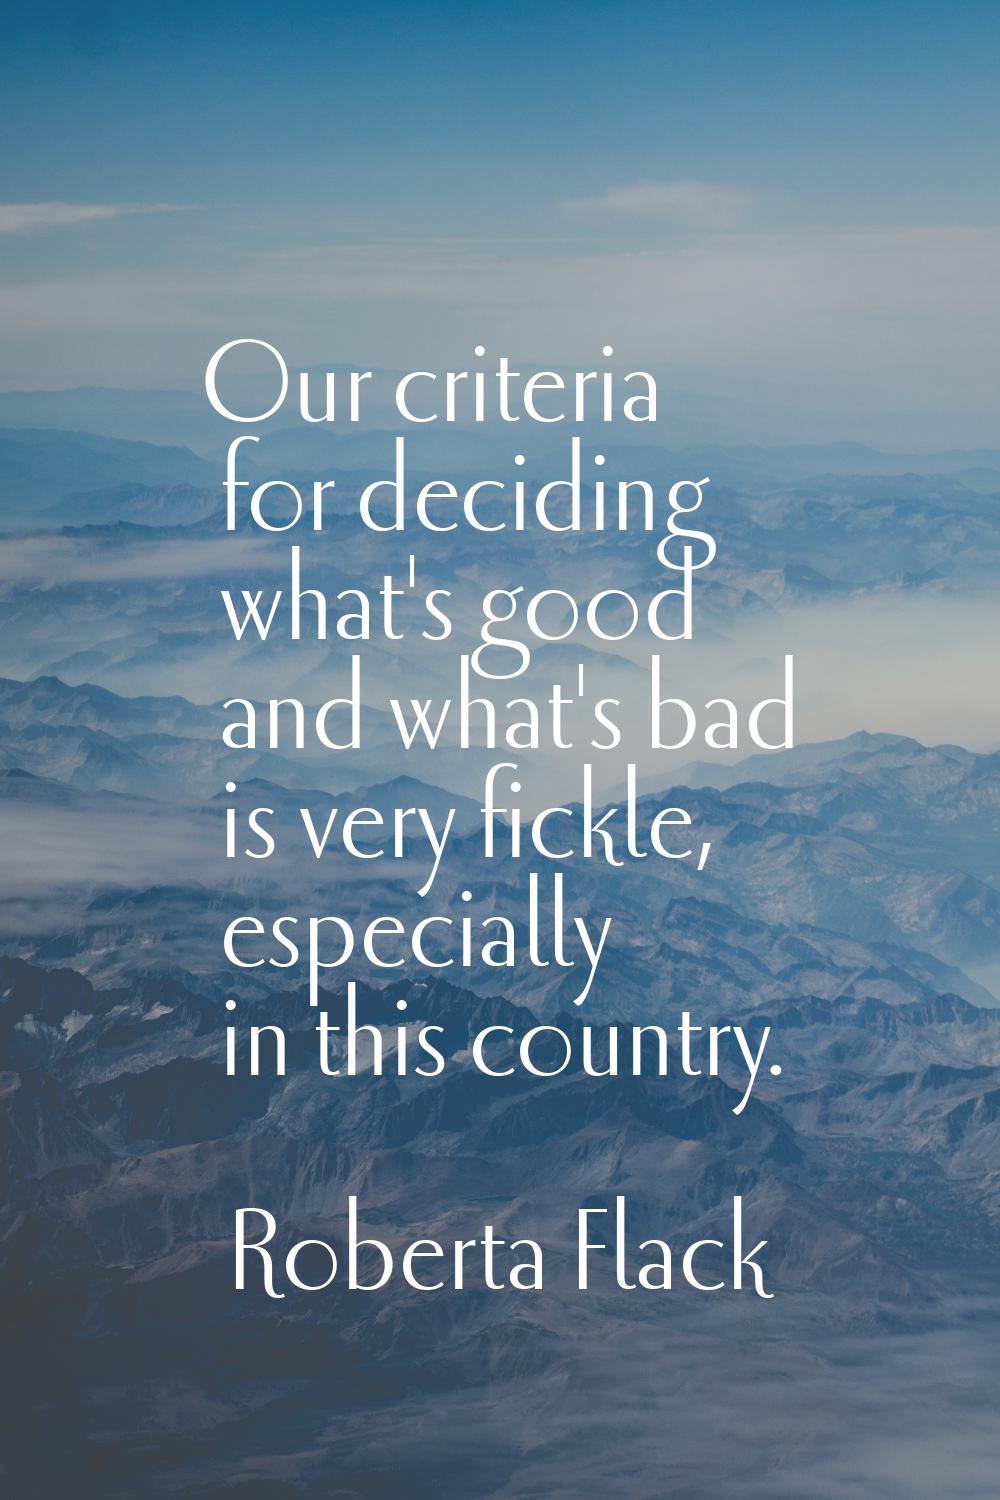 Our criteria for deciding what's good and what's bad is very fickle, especially in this country.